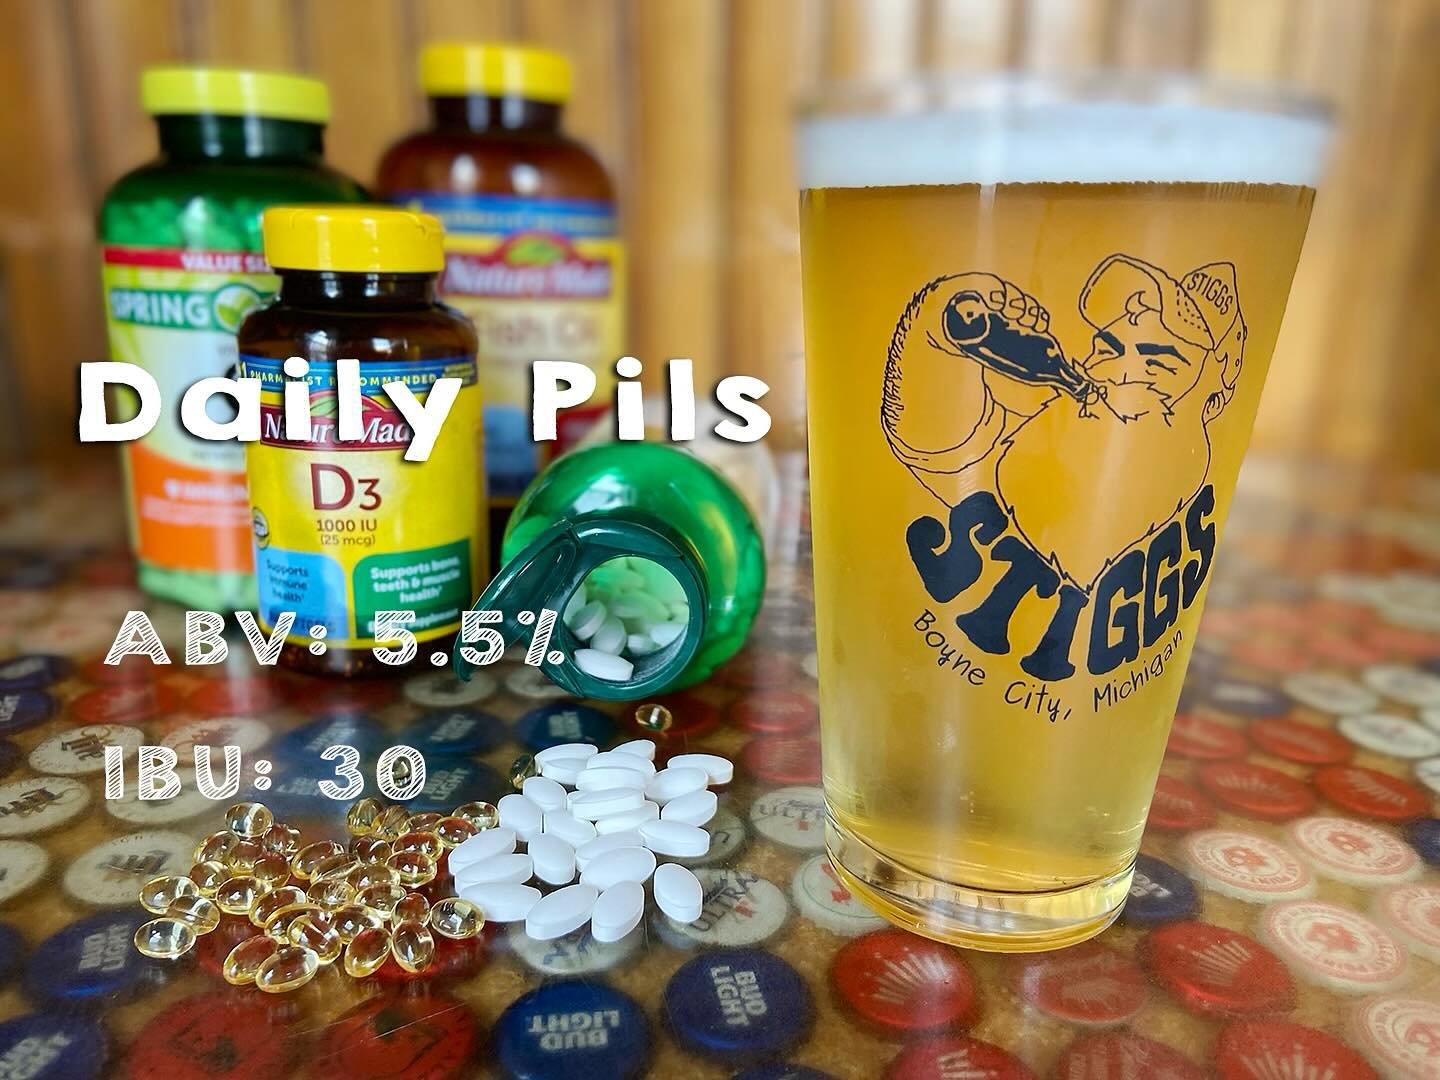 ‼️ New on Tap 🍻 Don&rsquo;t forget to take your Daily Pils 😝

Back by popular and seasonal demand with a little punch of hops added this year!  Our take on this traditional style is balanced with a distinct breast character and a mild hop bite, acc